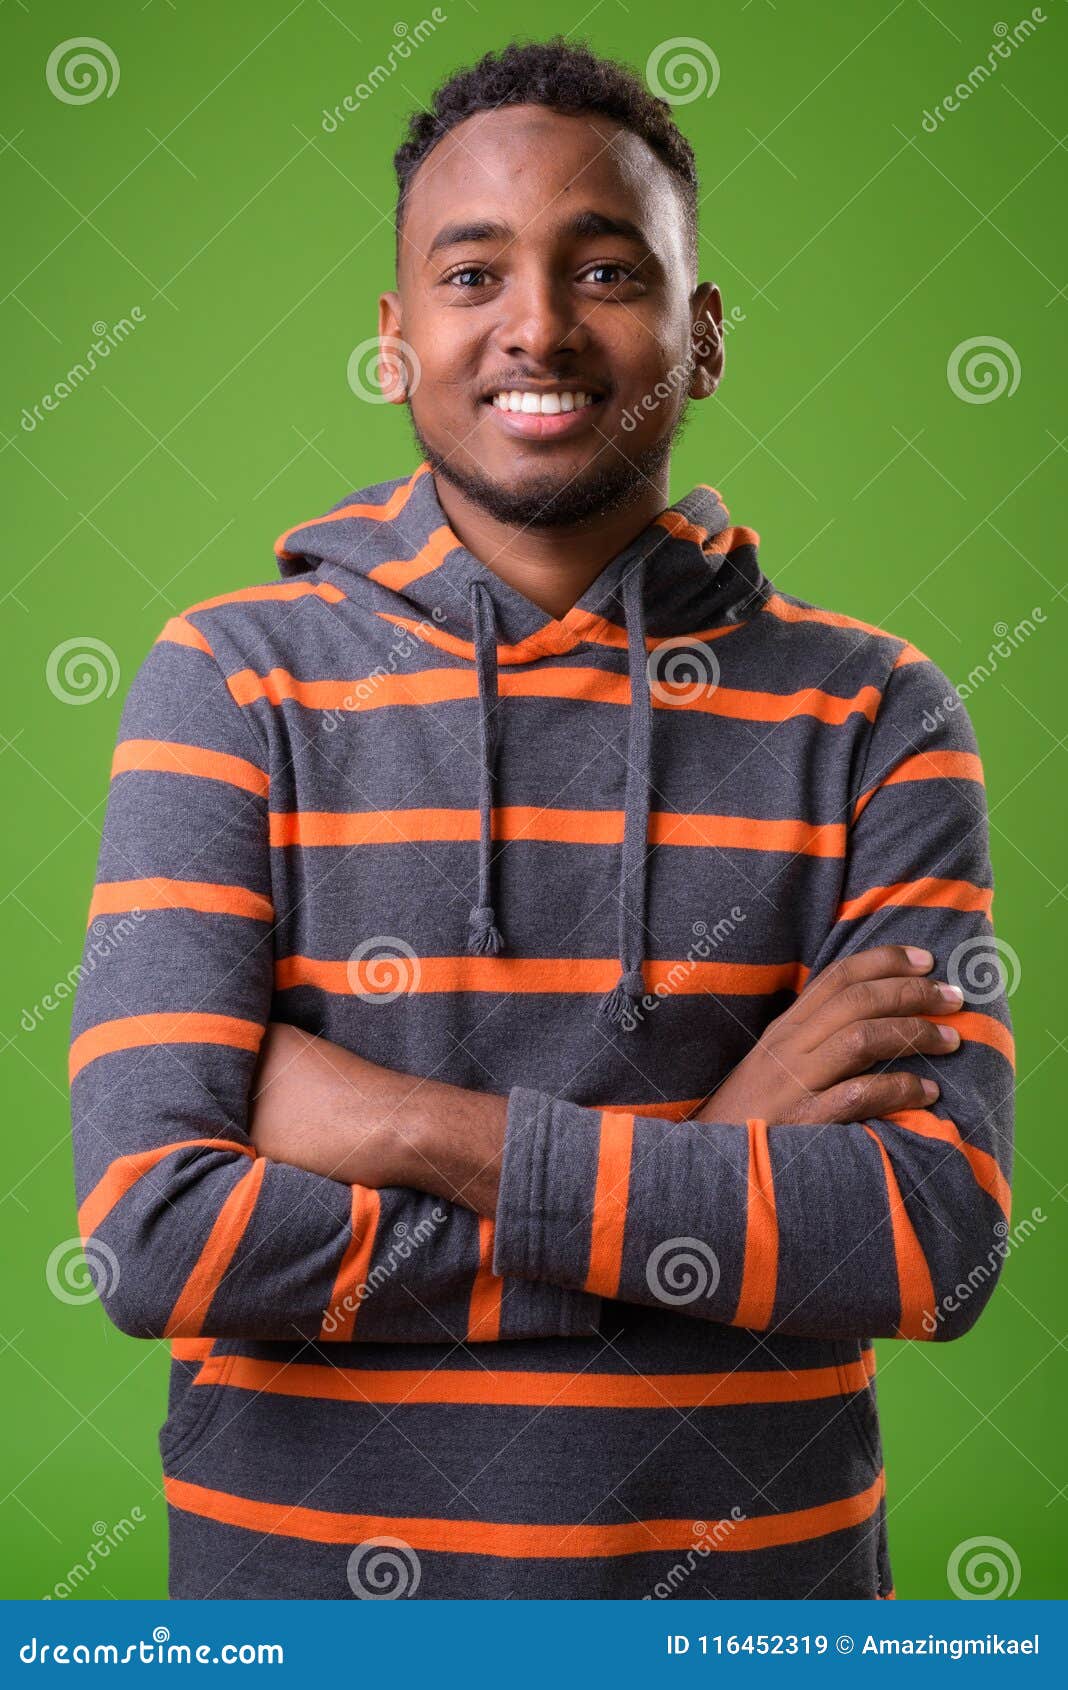 studio-shot-young-handsome-african-man-against-green-background-young-handsome-african-man-against-green-background-116452319.jpg